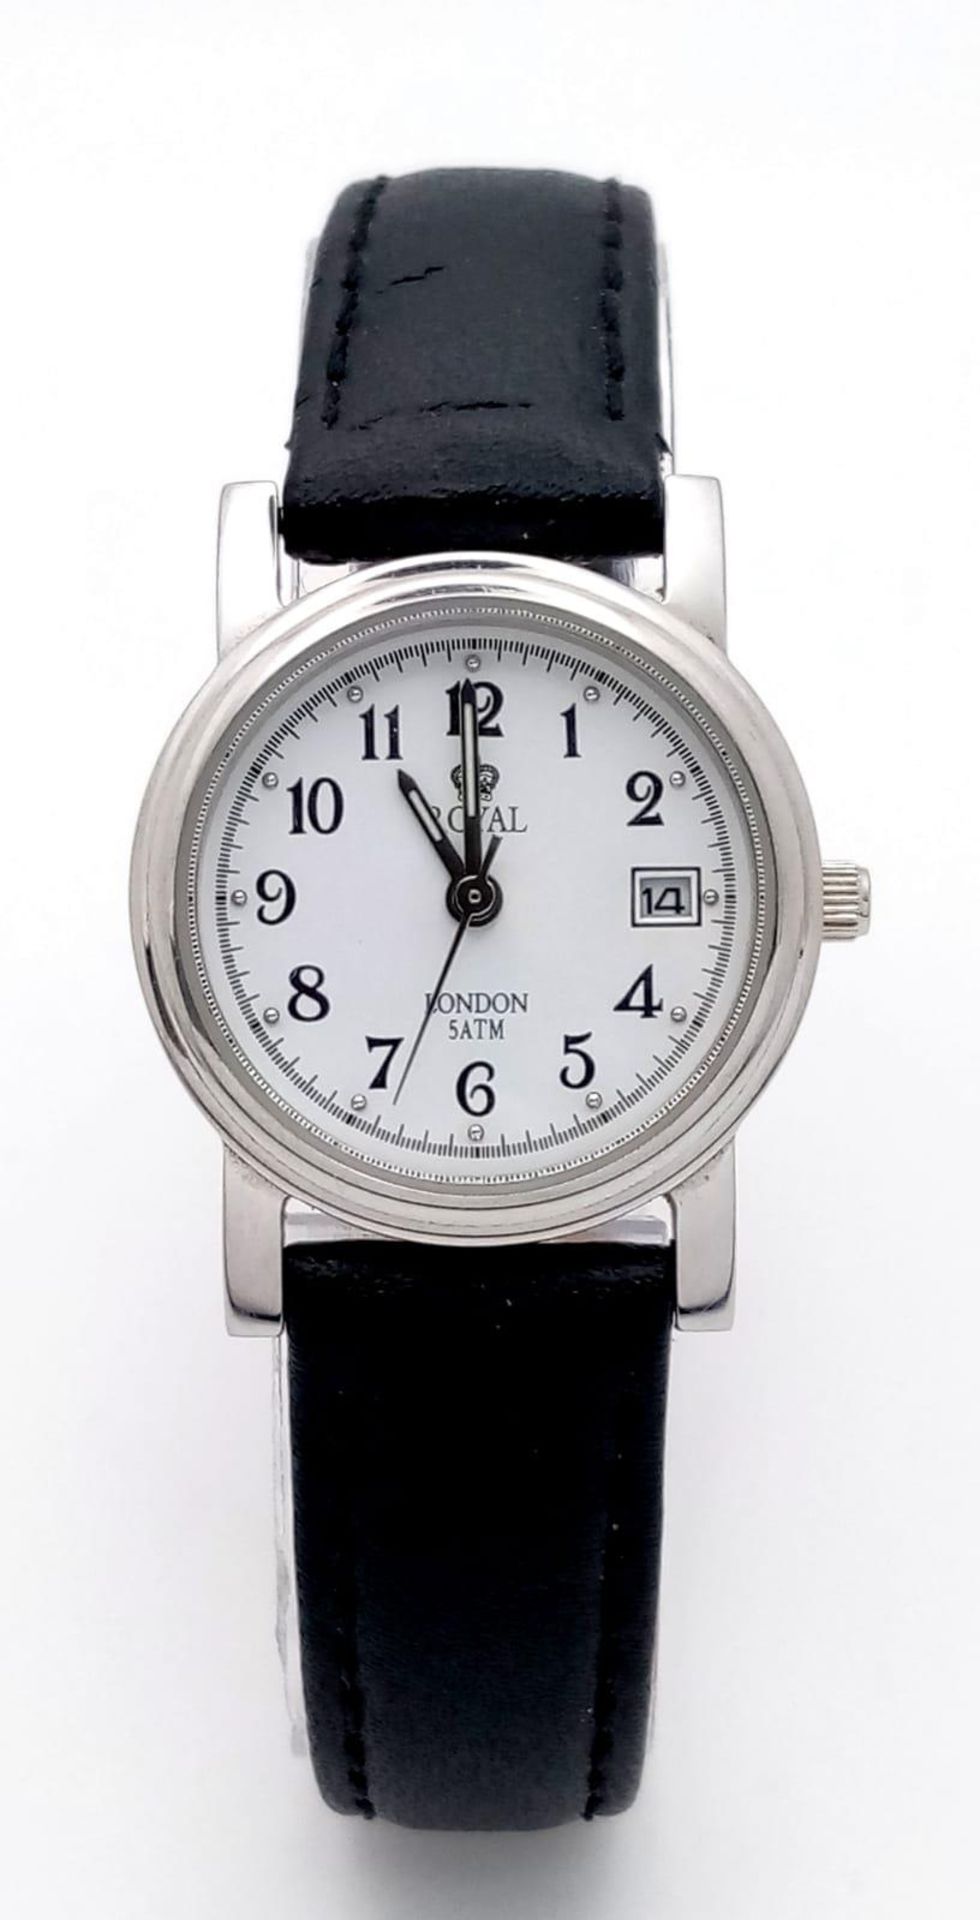 A Ladies Royal London Quartz Watch. Black leather strap. Stainless steel case - 25mm. White dial - Image 2 of 7